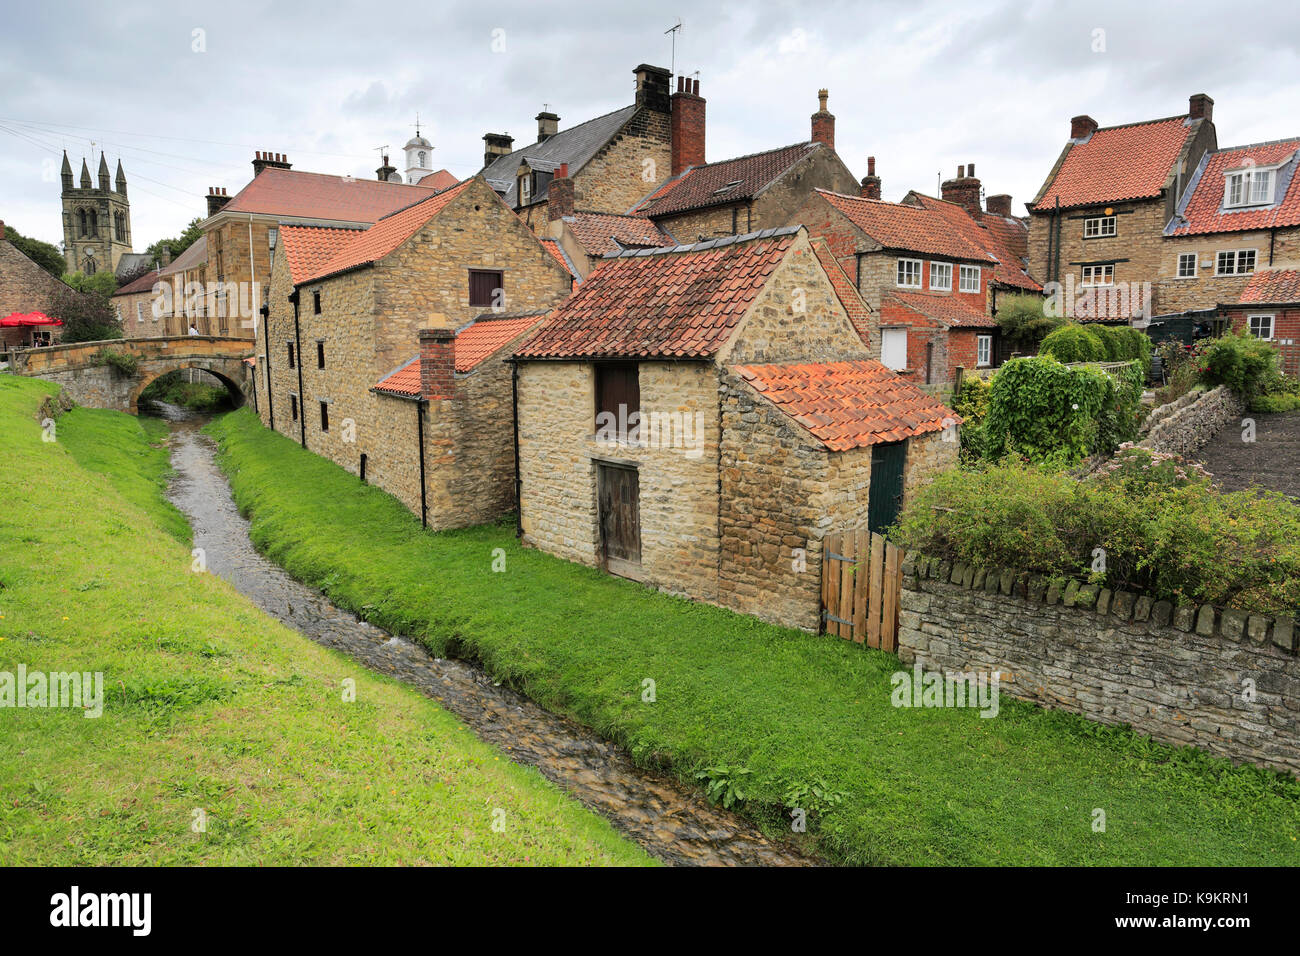 Traditional stone cottages, Helmsley village, North York Moors National Park, North Yorkshire, England, UK Stock Photo